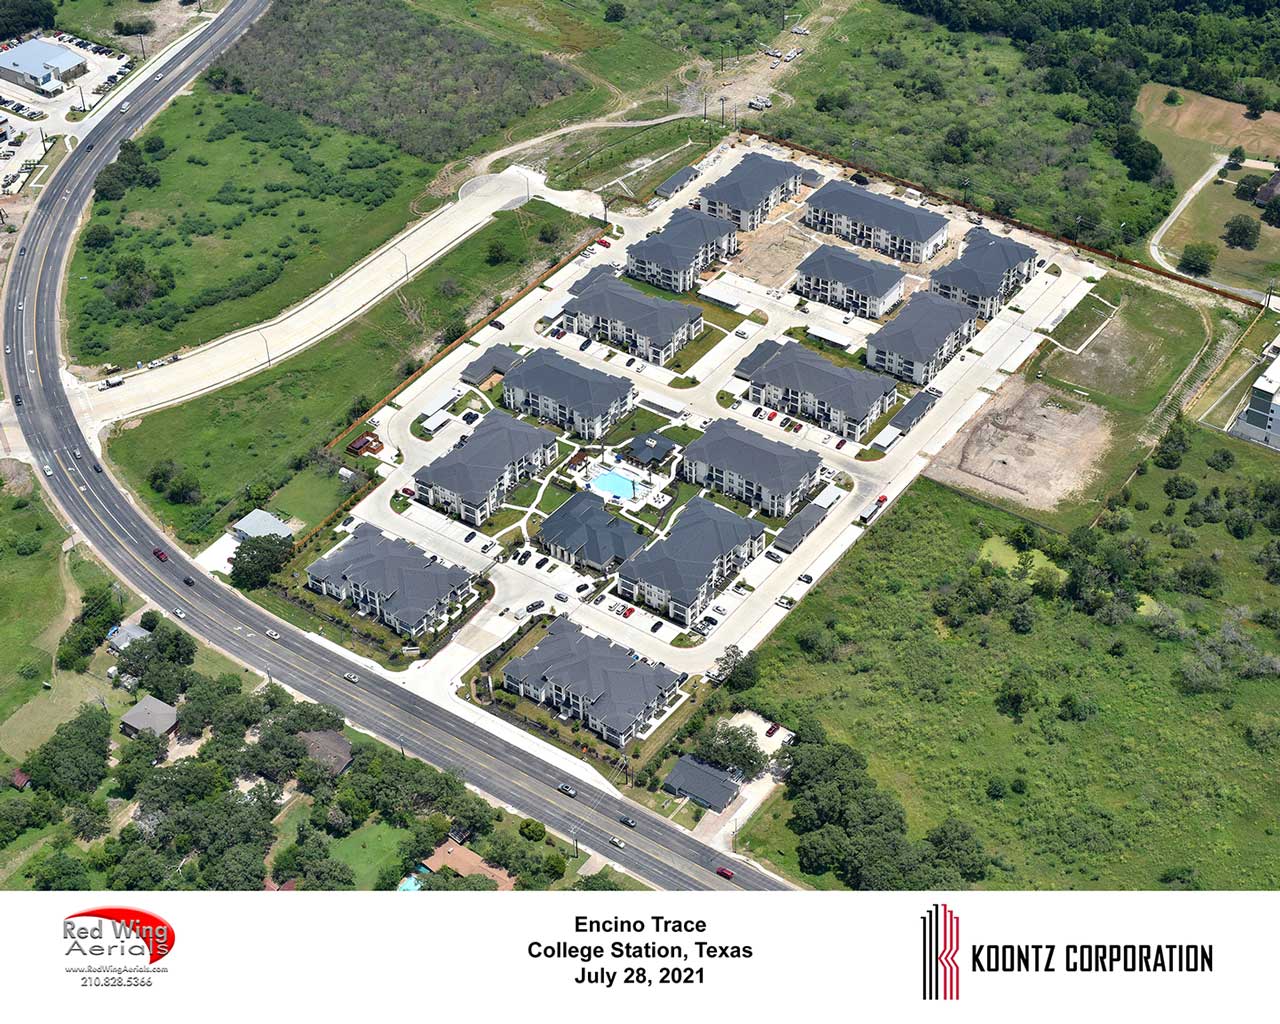 Arial photo of Encino Trace Luxury Apartments in College Station Texas